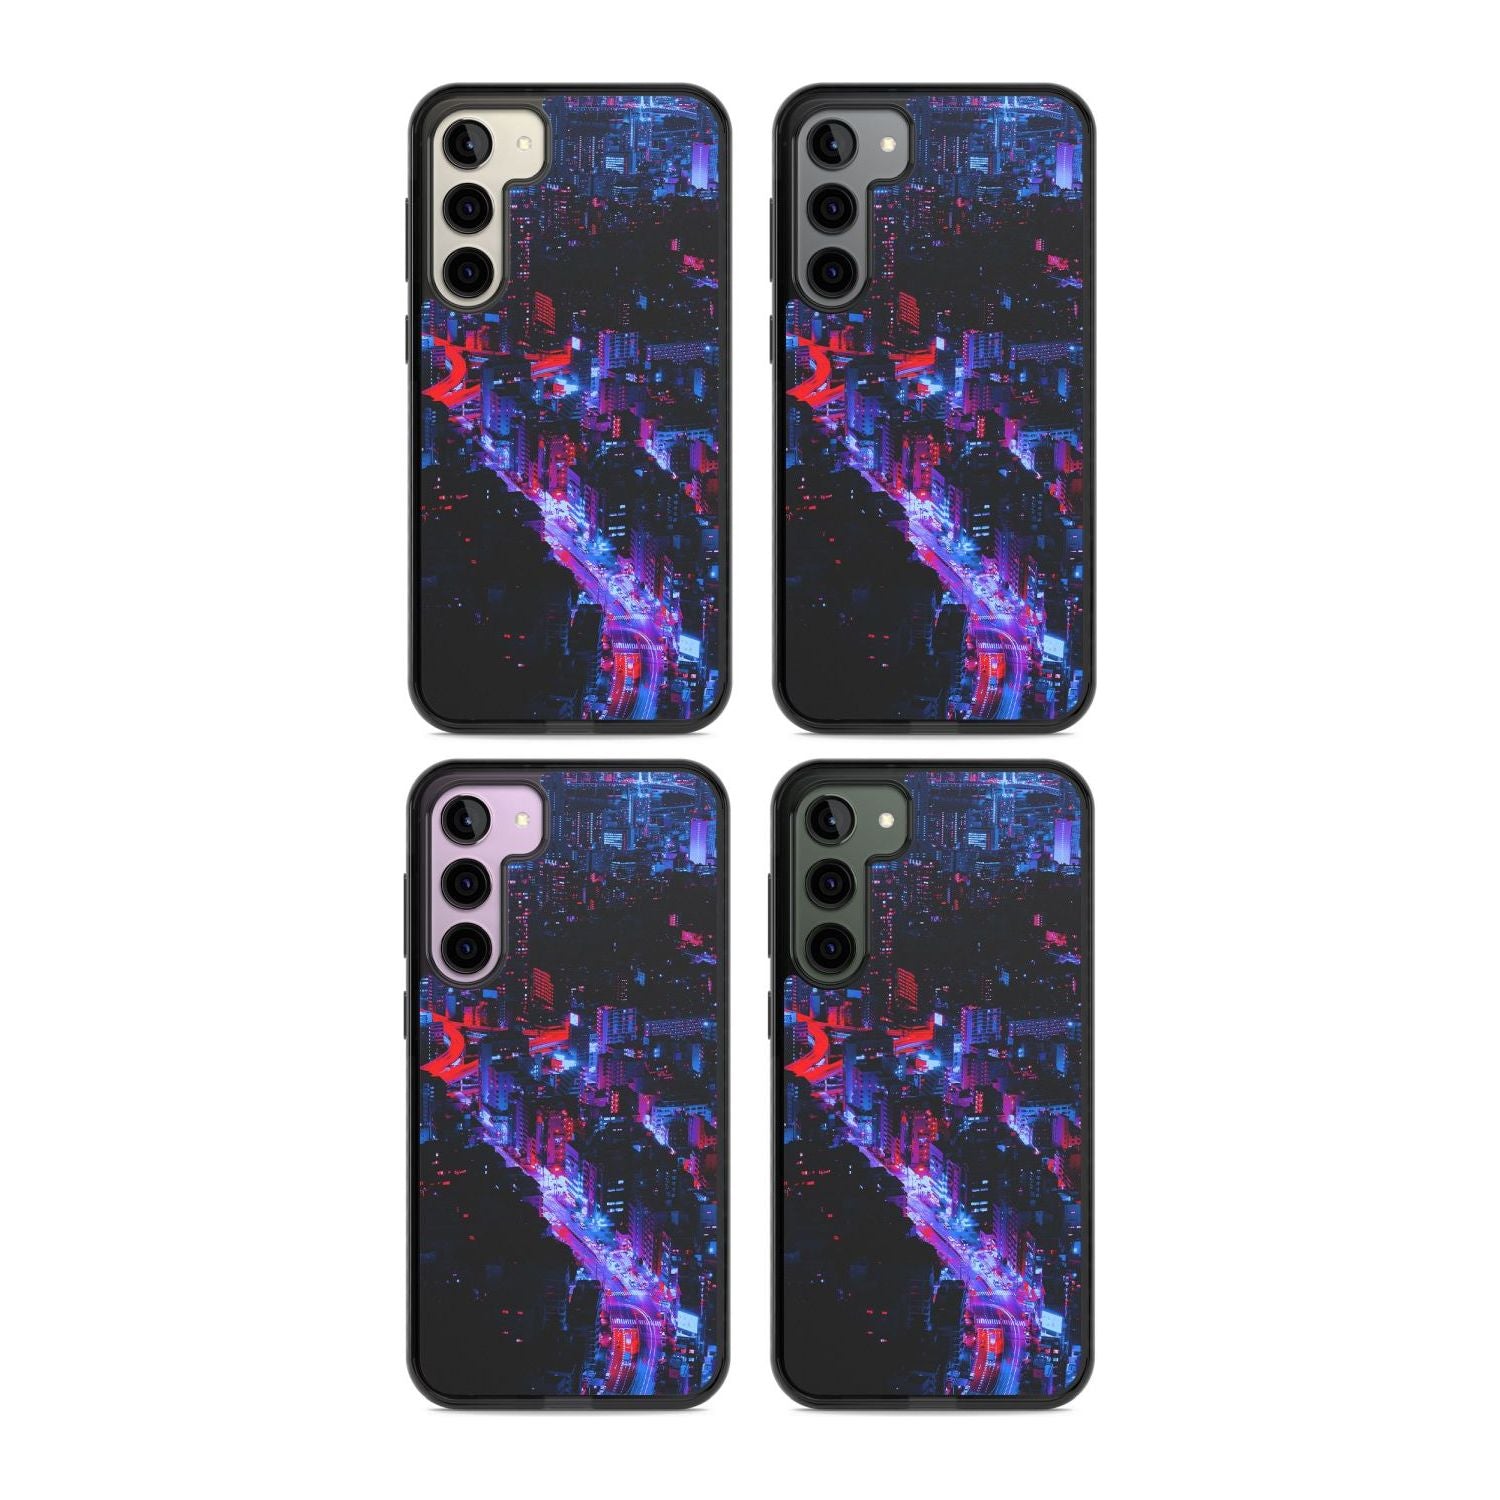 Arial City View - Neon Cities Photographs Phone Case iPhone 15 Pro Max / Black Impact Case,iPhone 15 Plus / Black Impact Case,iPhone 15 Pro / Black Impact Case,iPhone 15 / Black Impact Case,iPhone 15 Pro Max / Impact Case,iPhone 15 Plus / Impact Case,iPhone 15 Pro / Impact Case,iPhone 15 / Impact Case,iPhone 15 Pro Max / Magsafe Black Impact Case,iPhone 15 Plus / Magsafe Black Impact Case,iPhone 15 Pro / Magsafe Black Impact Case,iPhone 15 / Magsafe Black Impact Case,iPhone 14 Pro Max / Black Impact Case,iP